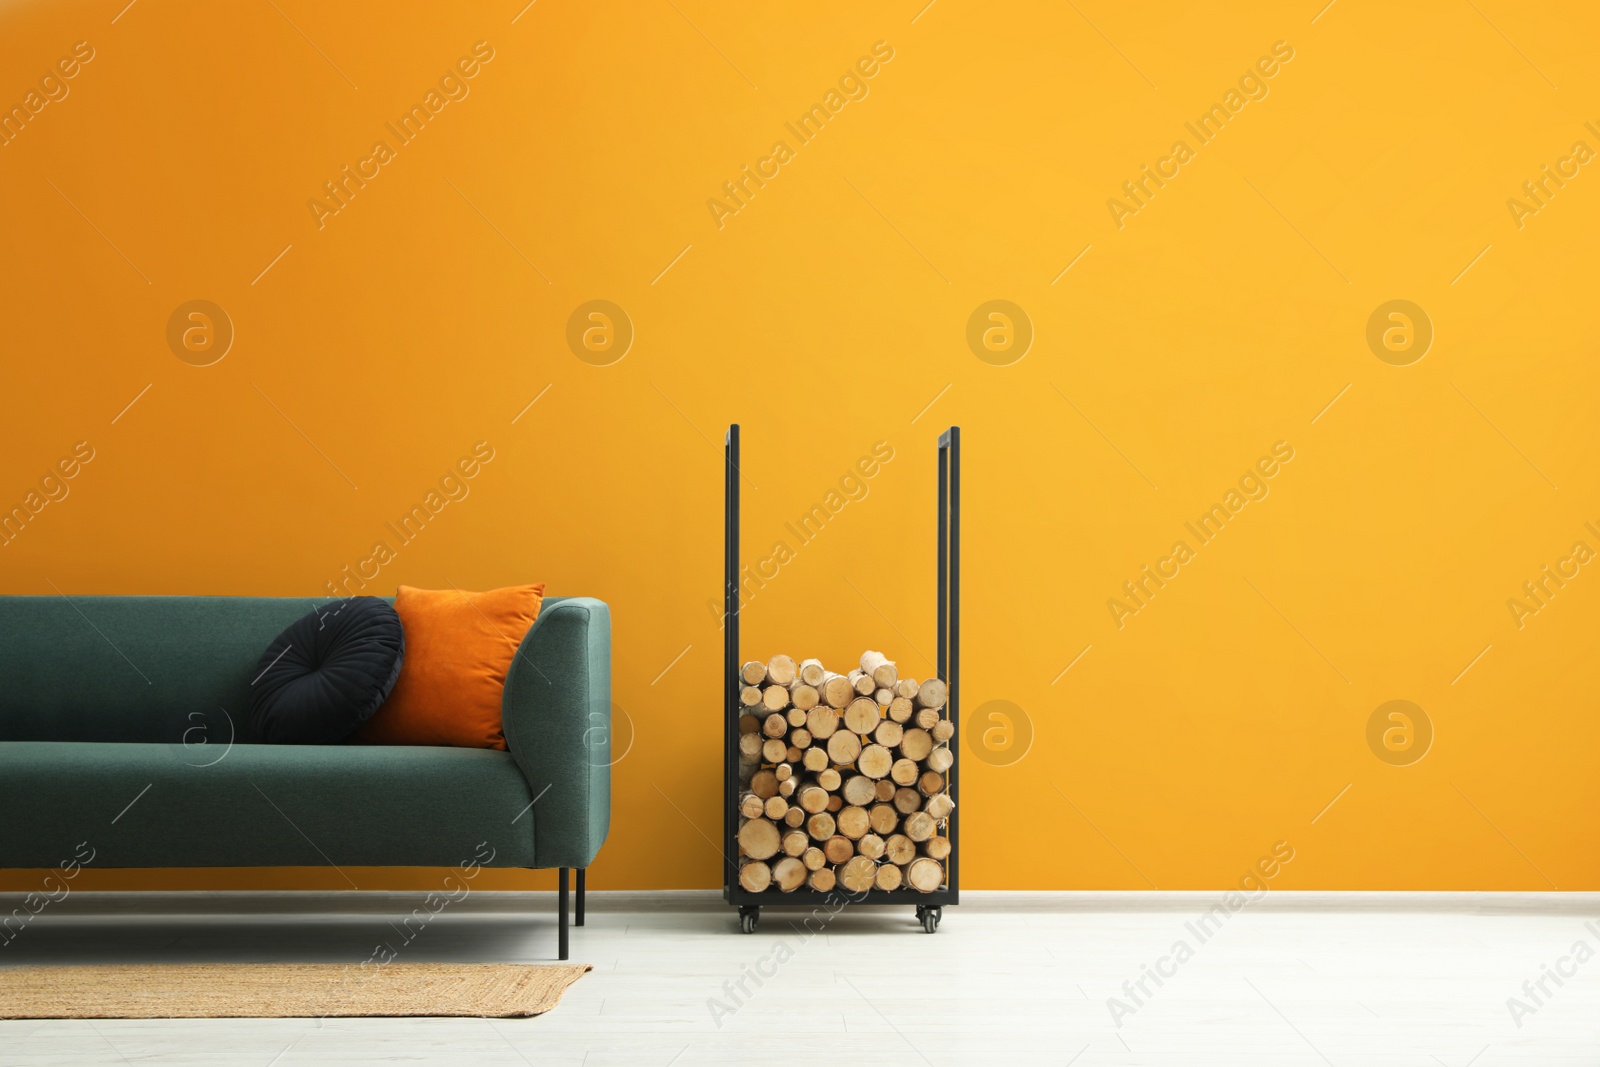 Photo of Stylish sofa with cushions, rug and firewood near orange wall indoors, space for text. Interior design